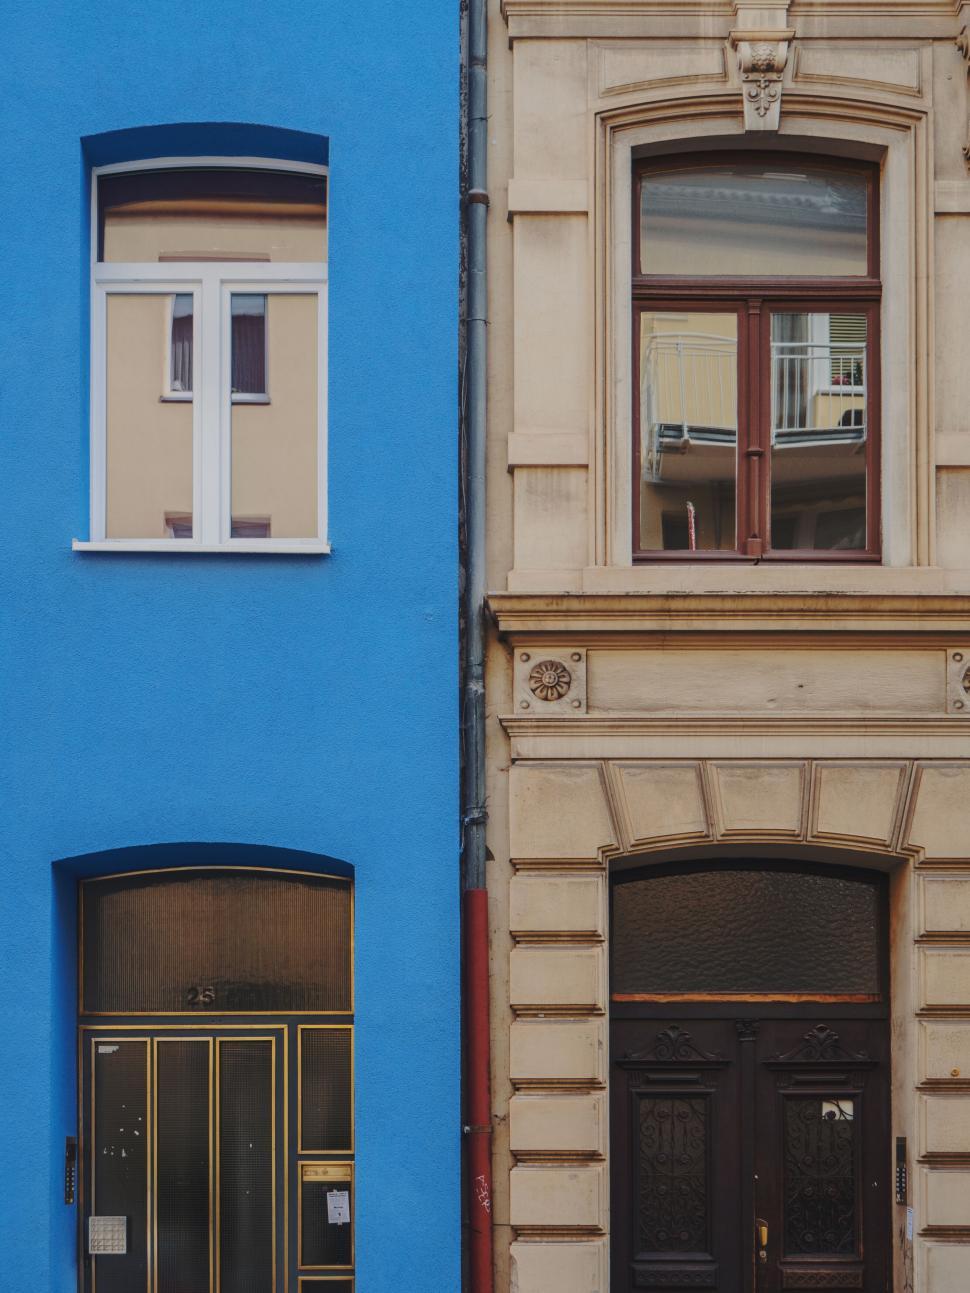 Free Image of Facade of blue and beige buildings 